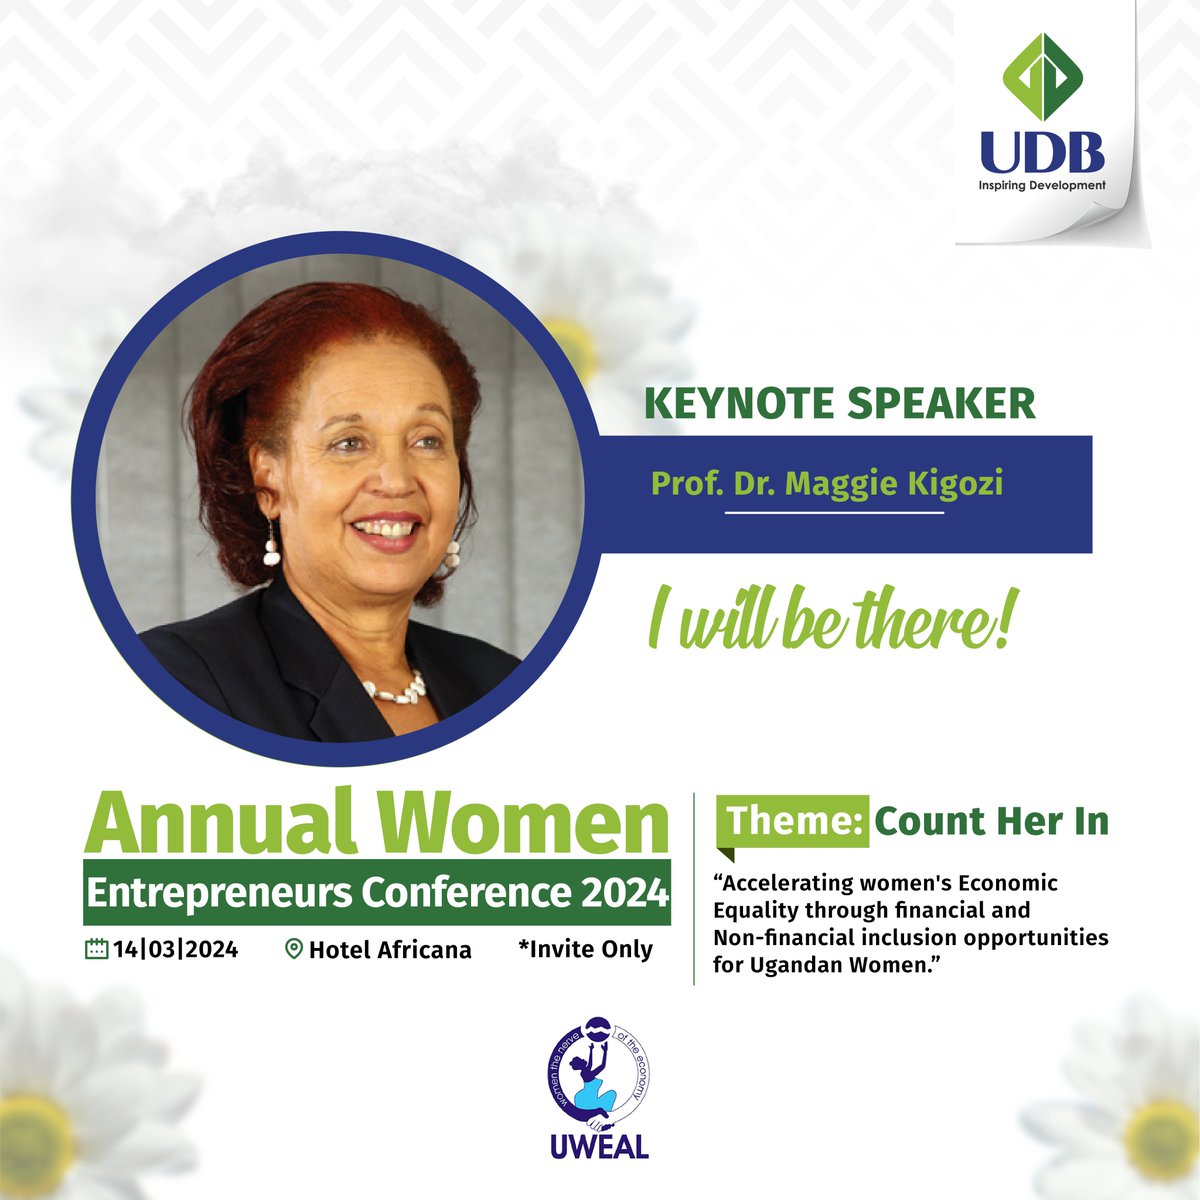 Prof. Dr. Kigozi Maggie will be delivering a Keynote speech at the annual Entrepreneurs conference tomorrow. @KigoziMaggie Join the conversation #UDB_UWEAL_Women24